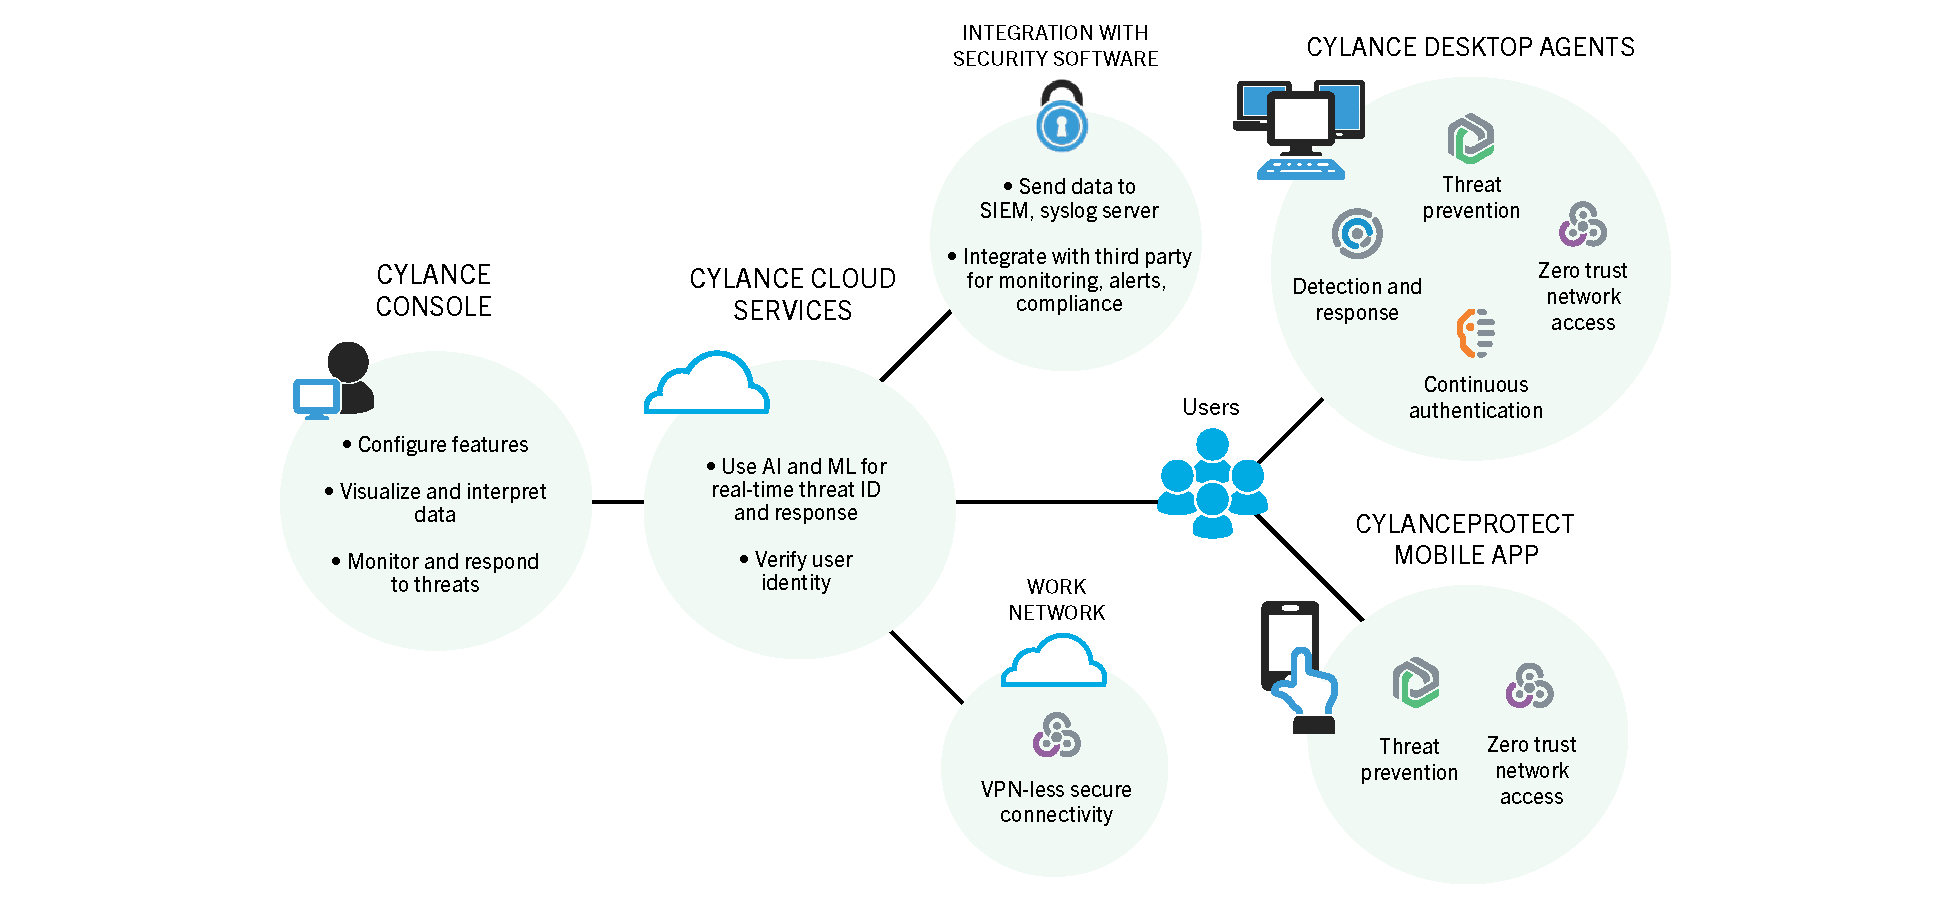 A visual overview of the components of Cylance Endpoint Security.